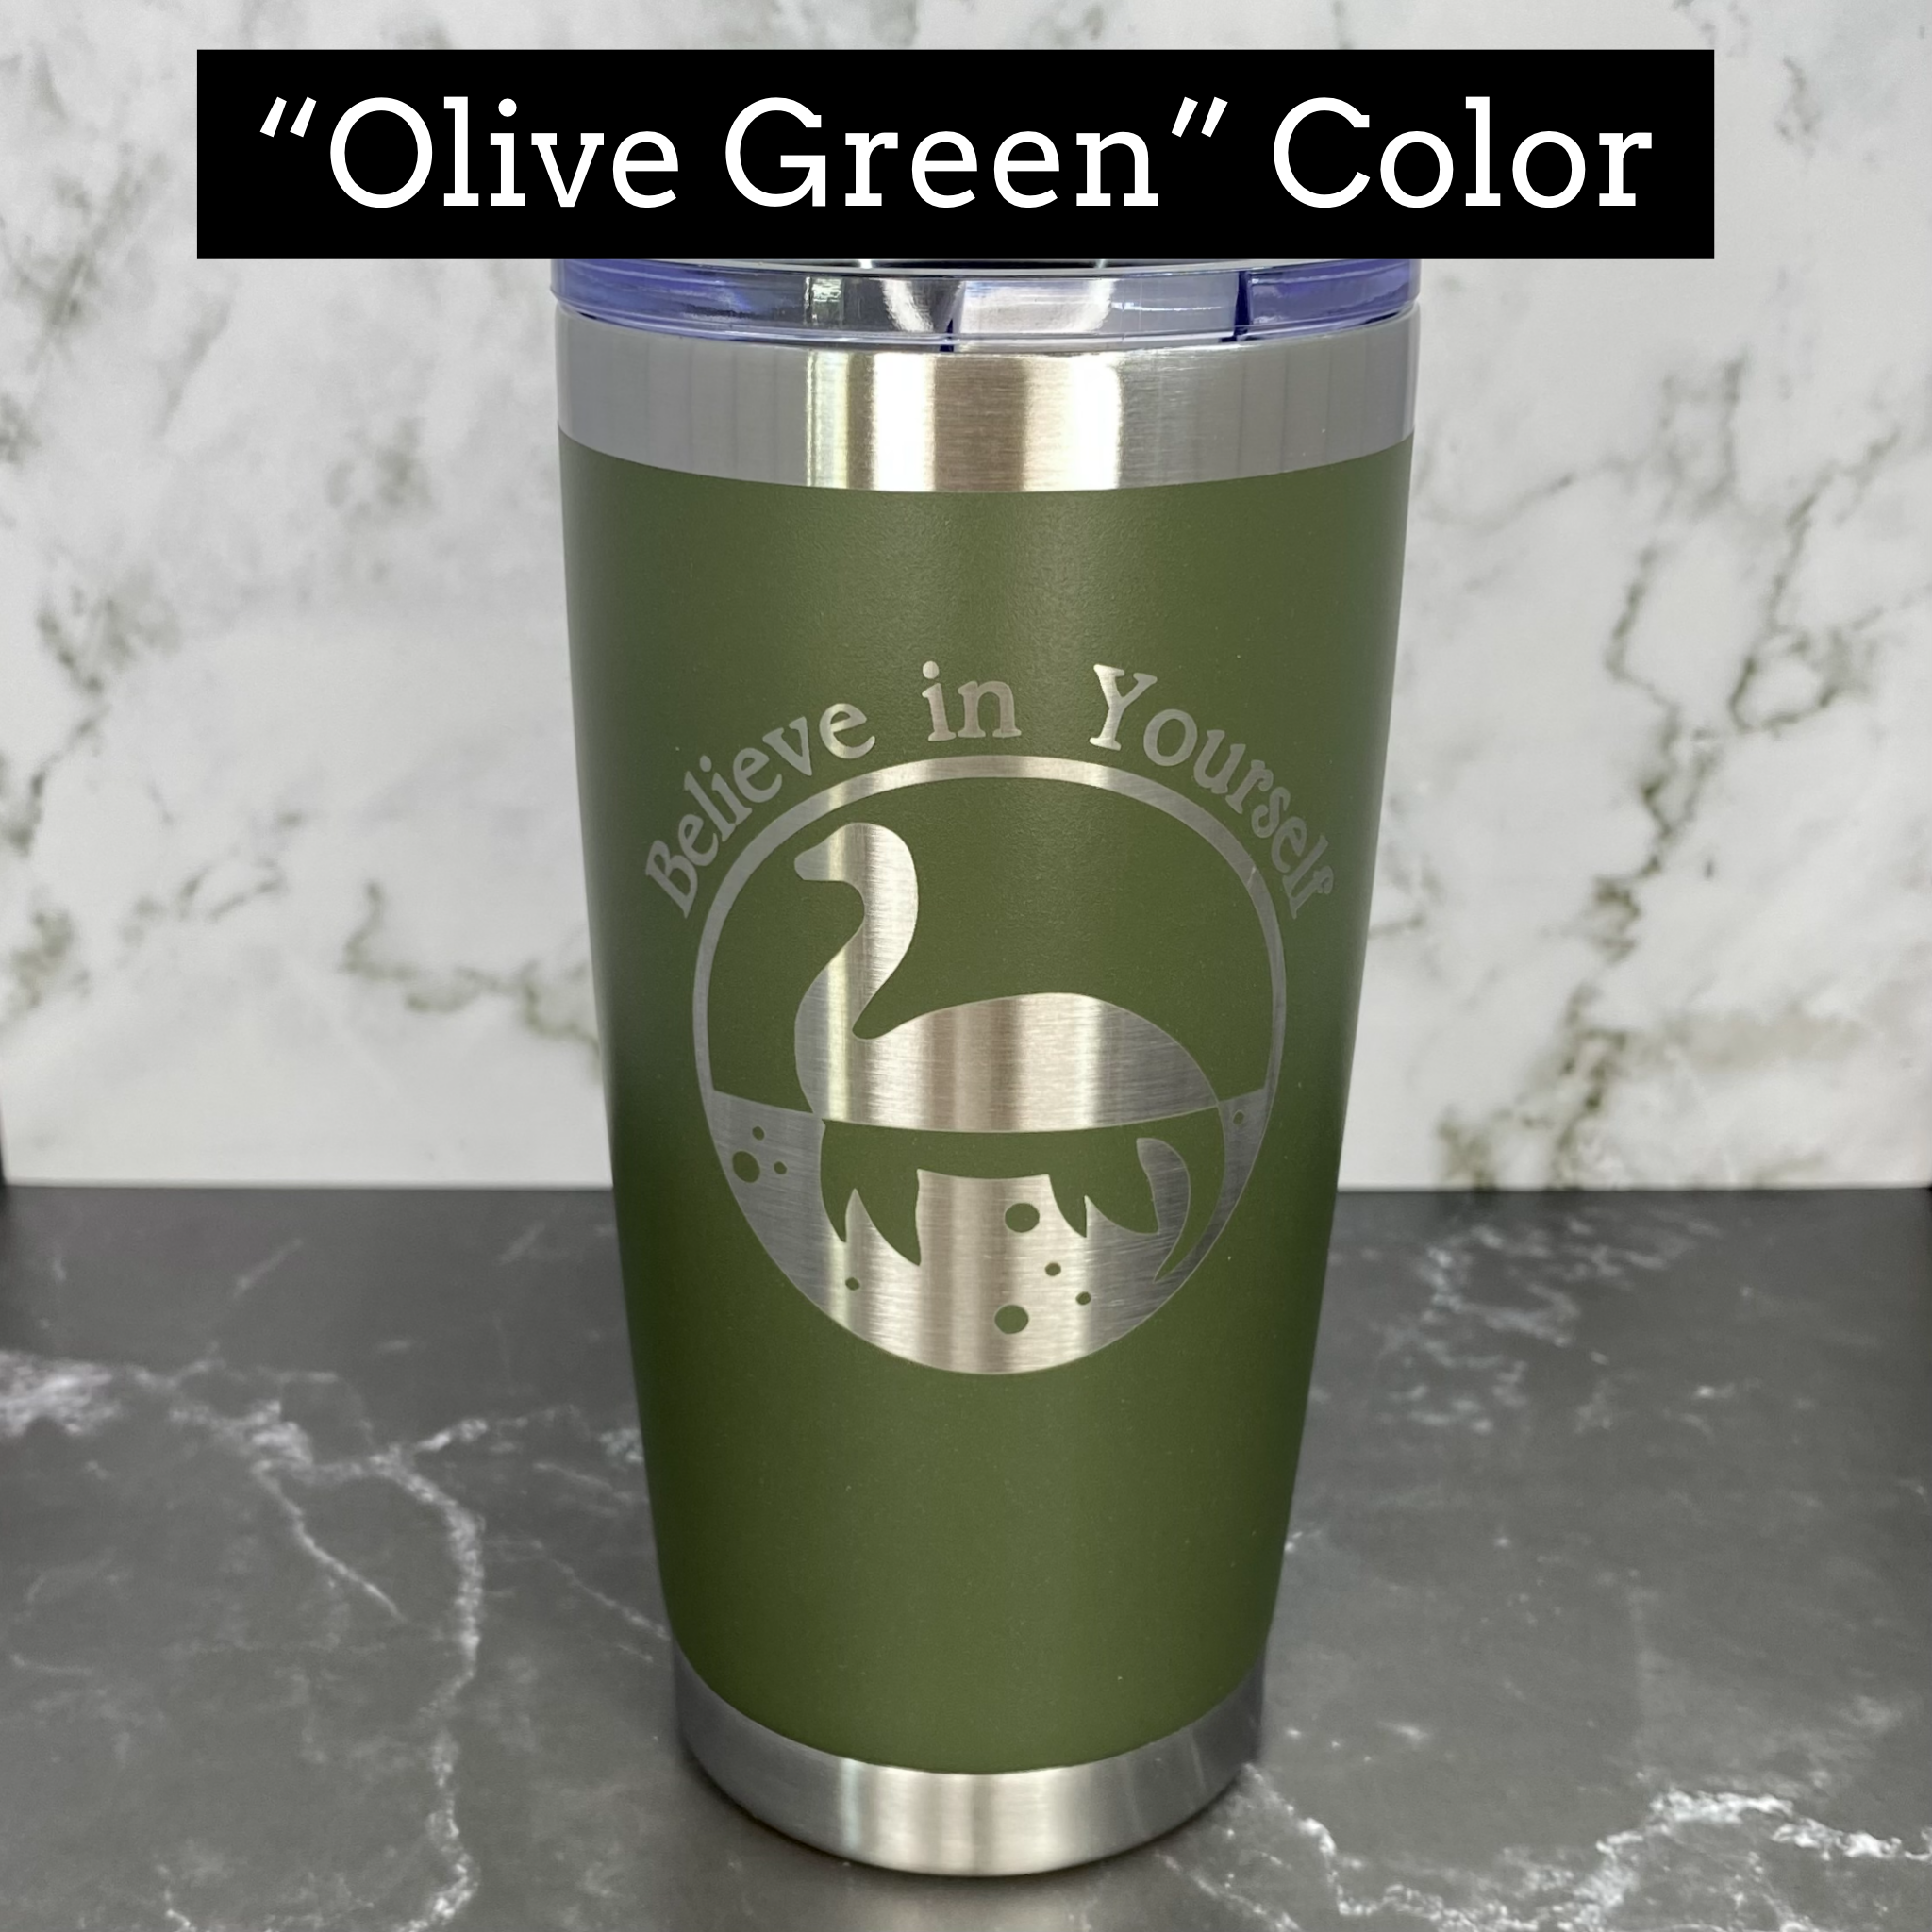 Wolf's Brother Laser Engraved Powder Coated 20oz Double Walled Insulated Tumbler - Outlander Inspiration